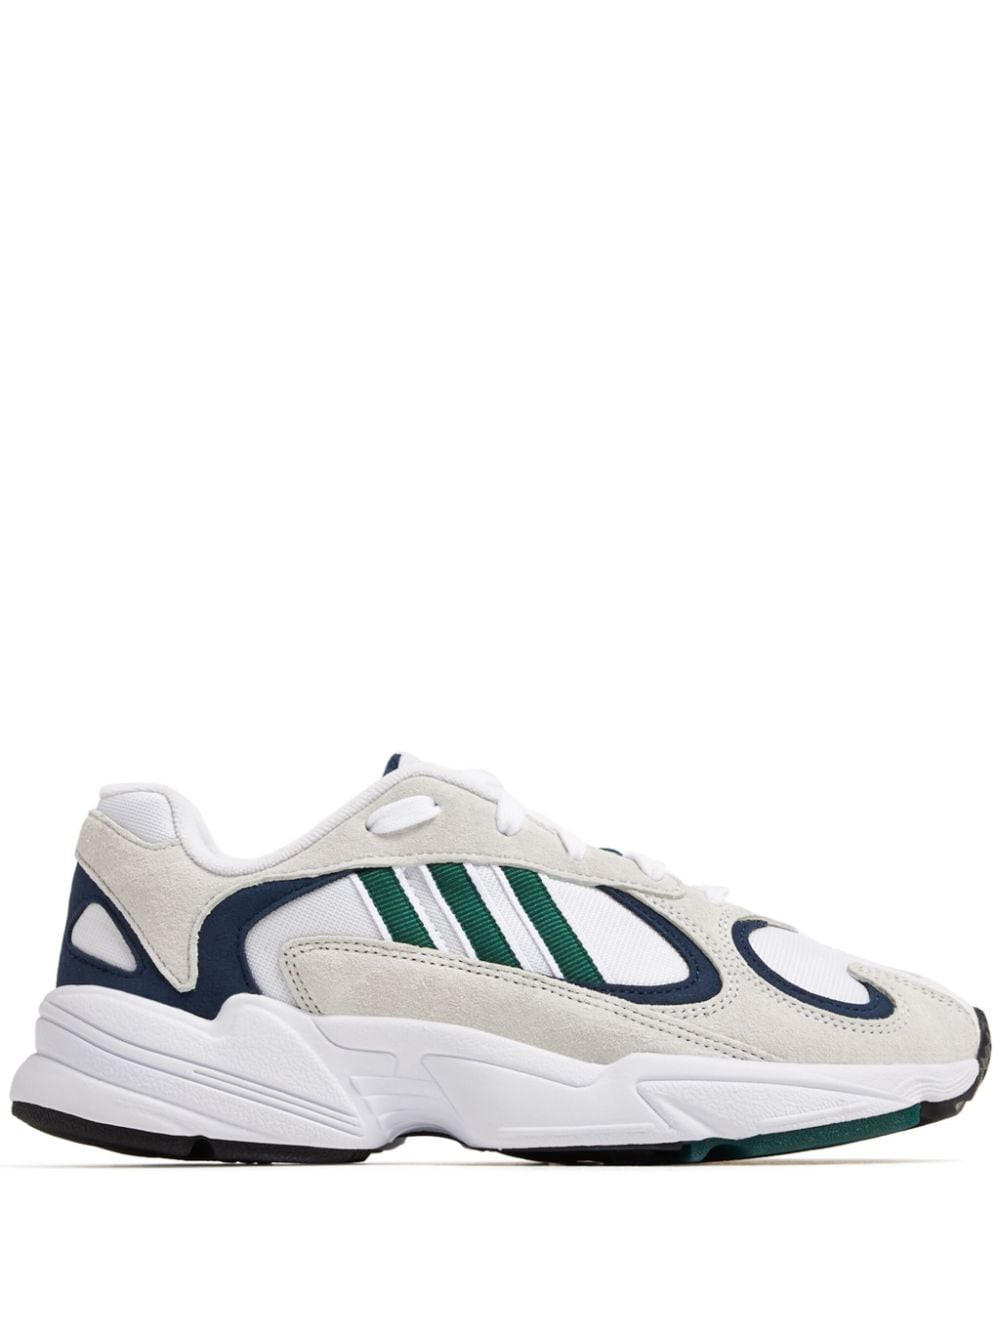 adidas Yung-1 low-top sneakers - White von adidas